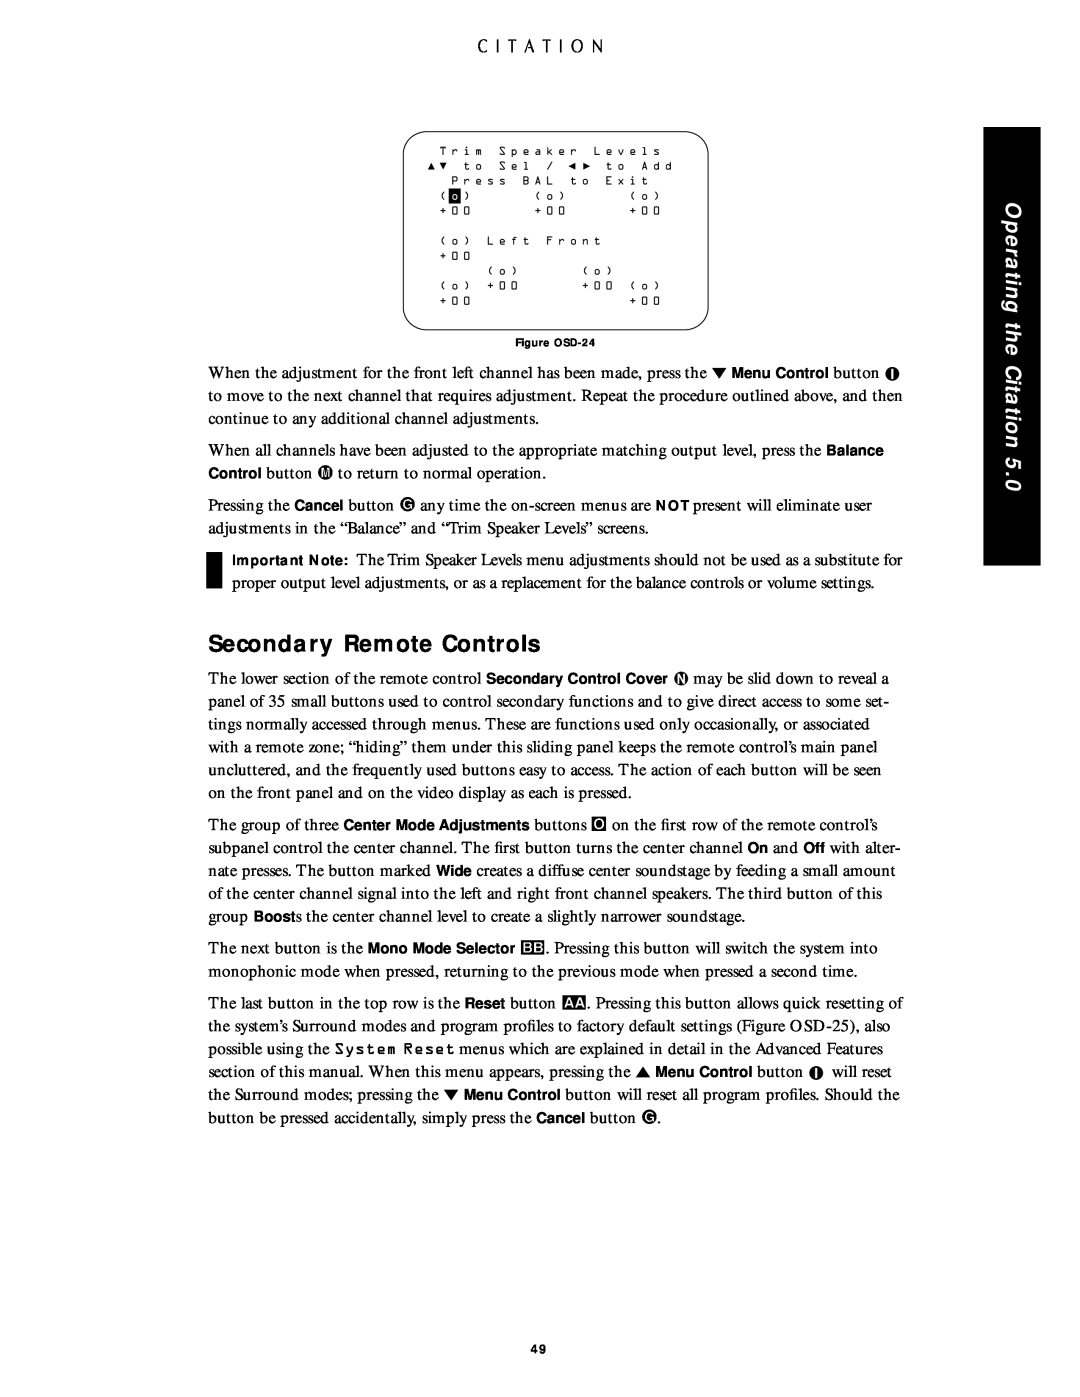 Citation Stereo Receiver owner manual Secondary Remote Controls, Operating the Citation, Figure OSD-24 